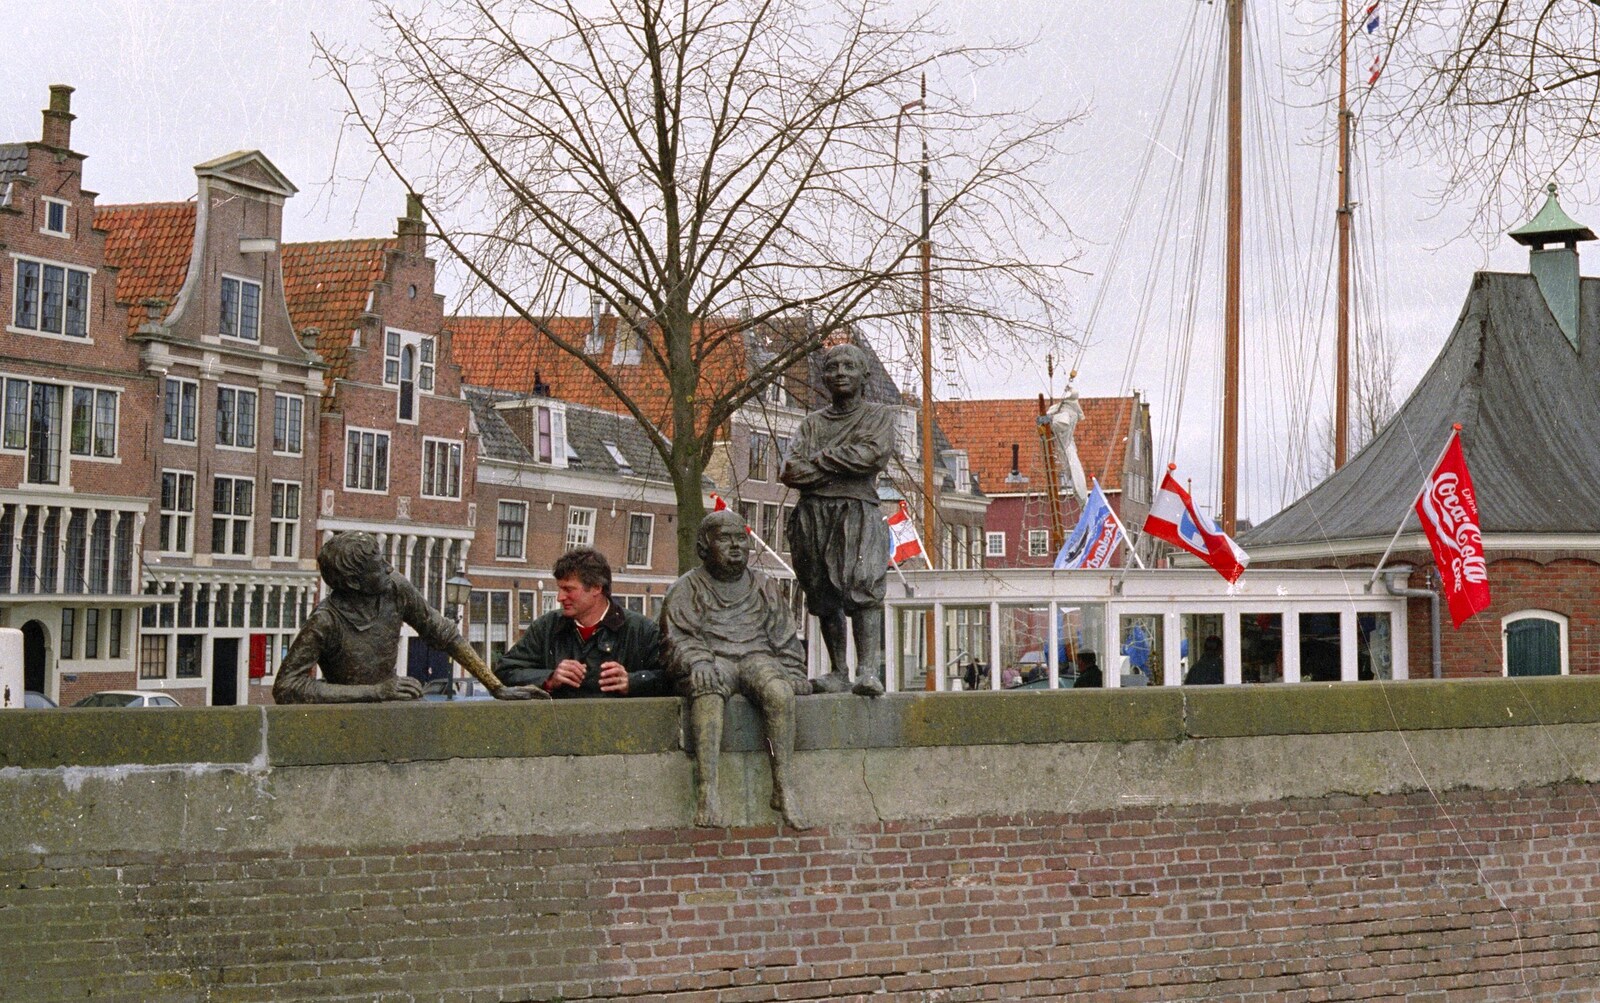 Out and About in Amsterdam, Hoorne, Vollendam and Edam, The Netherlands - 26th March 1992: Geoff and some statues on a wall in Hoorne